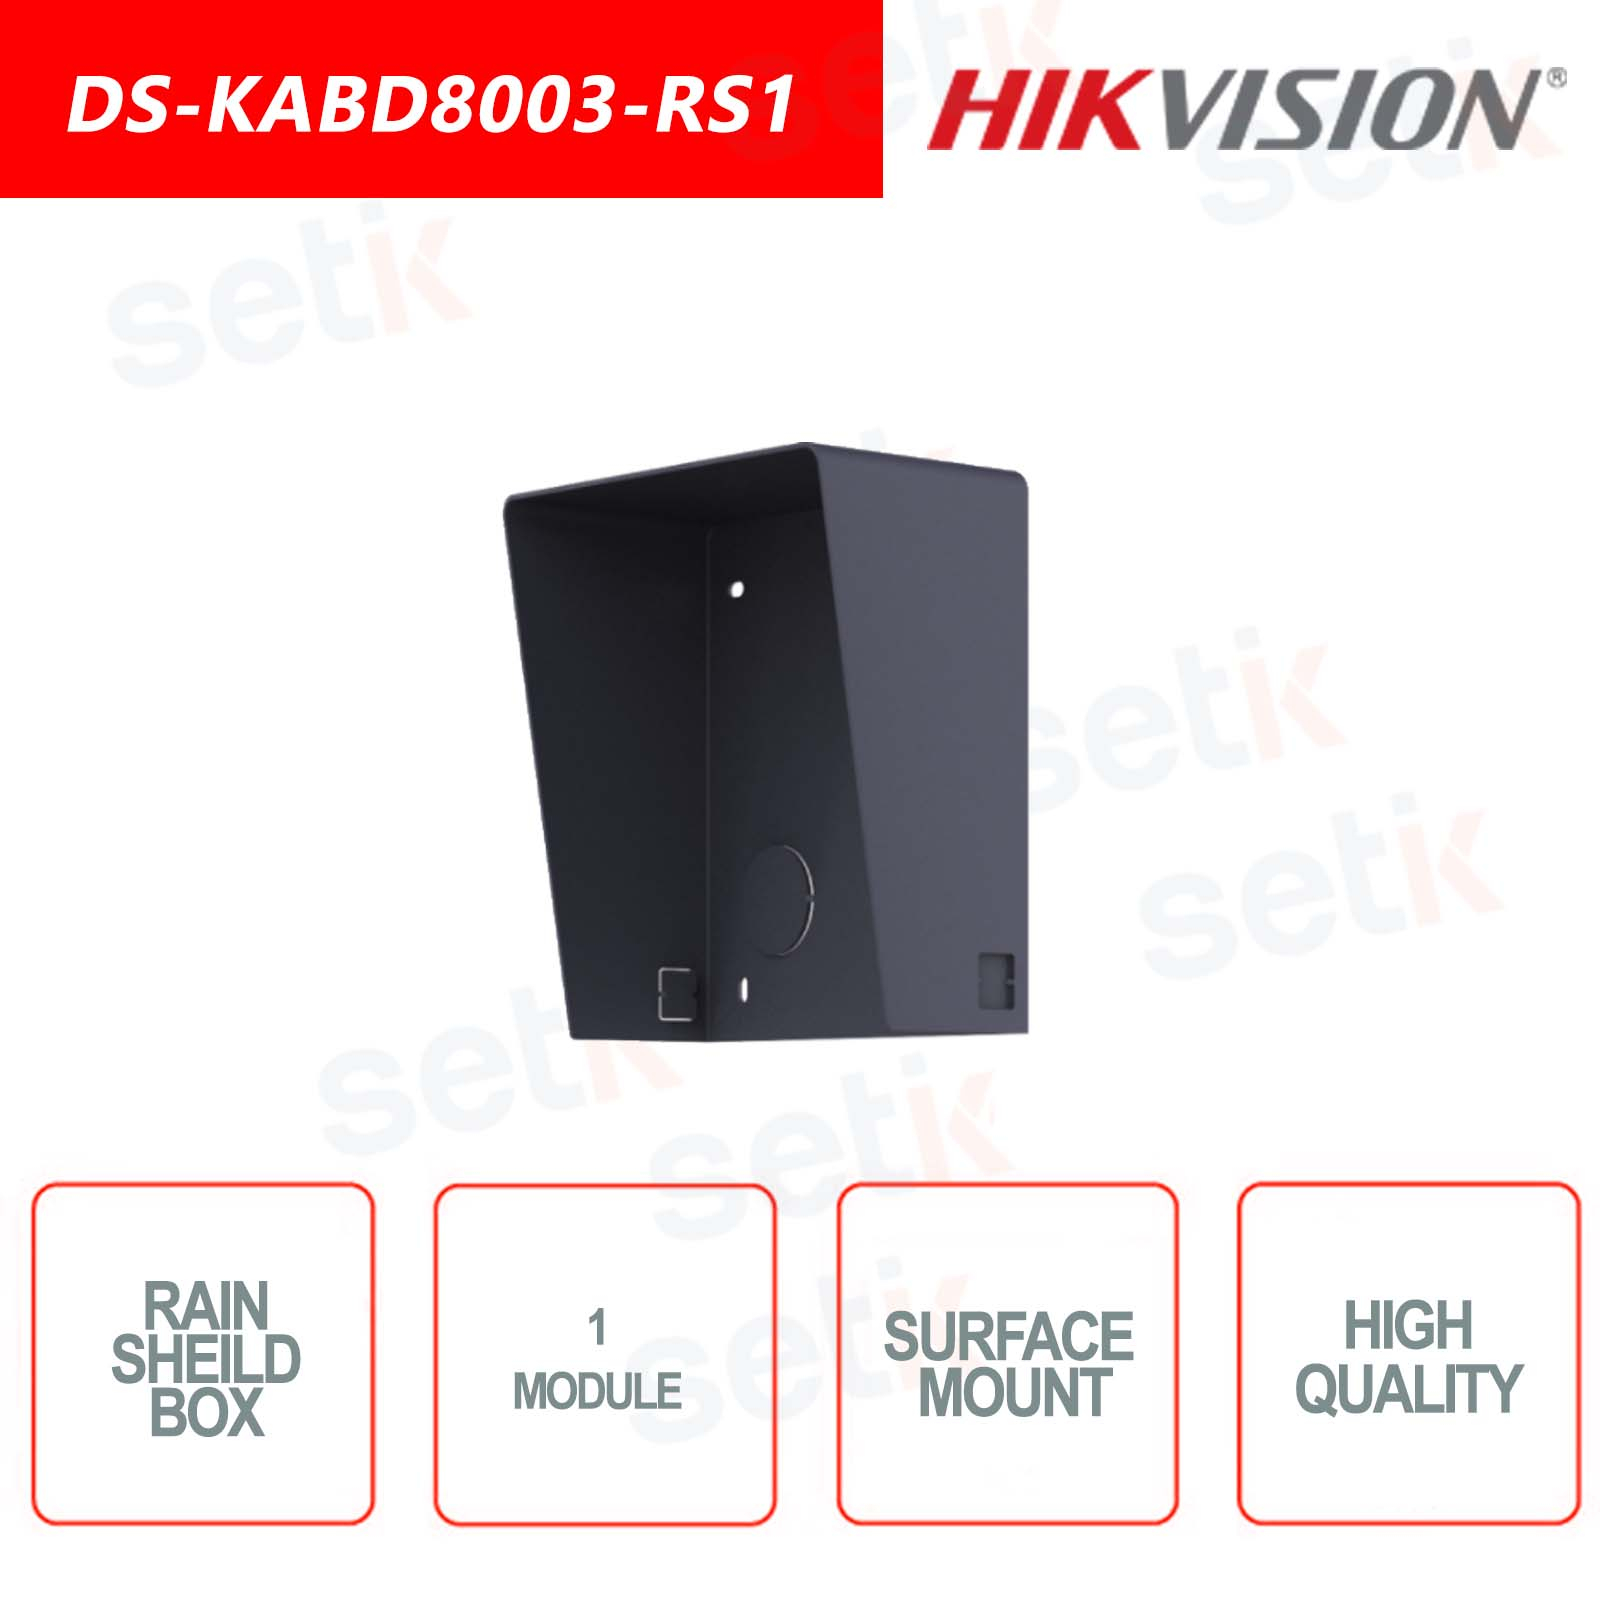 Hikvision Telaio Supporto Parasole DS-KABD8003-RS1